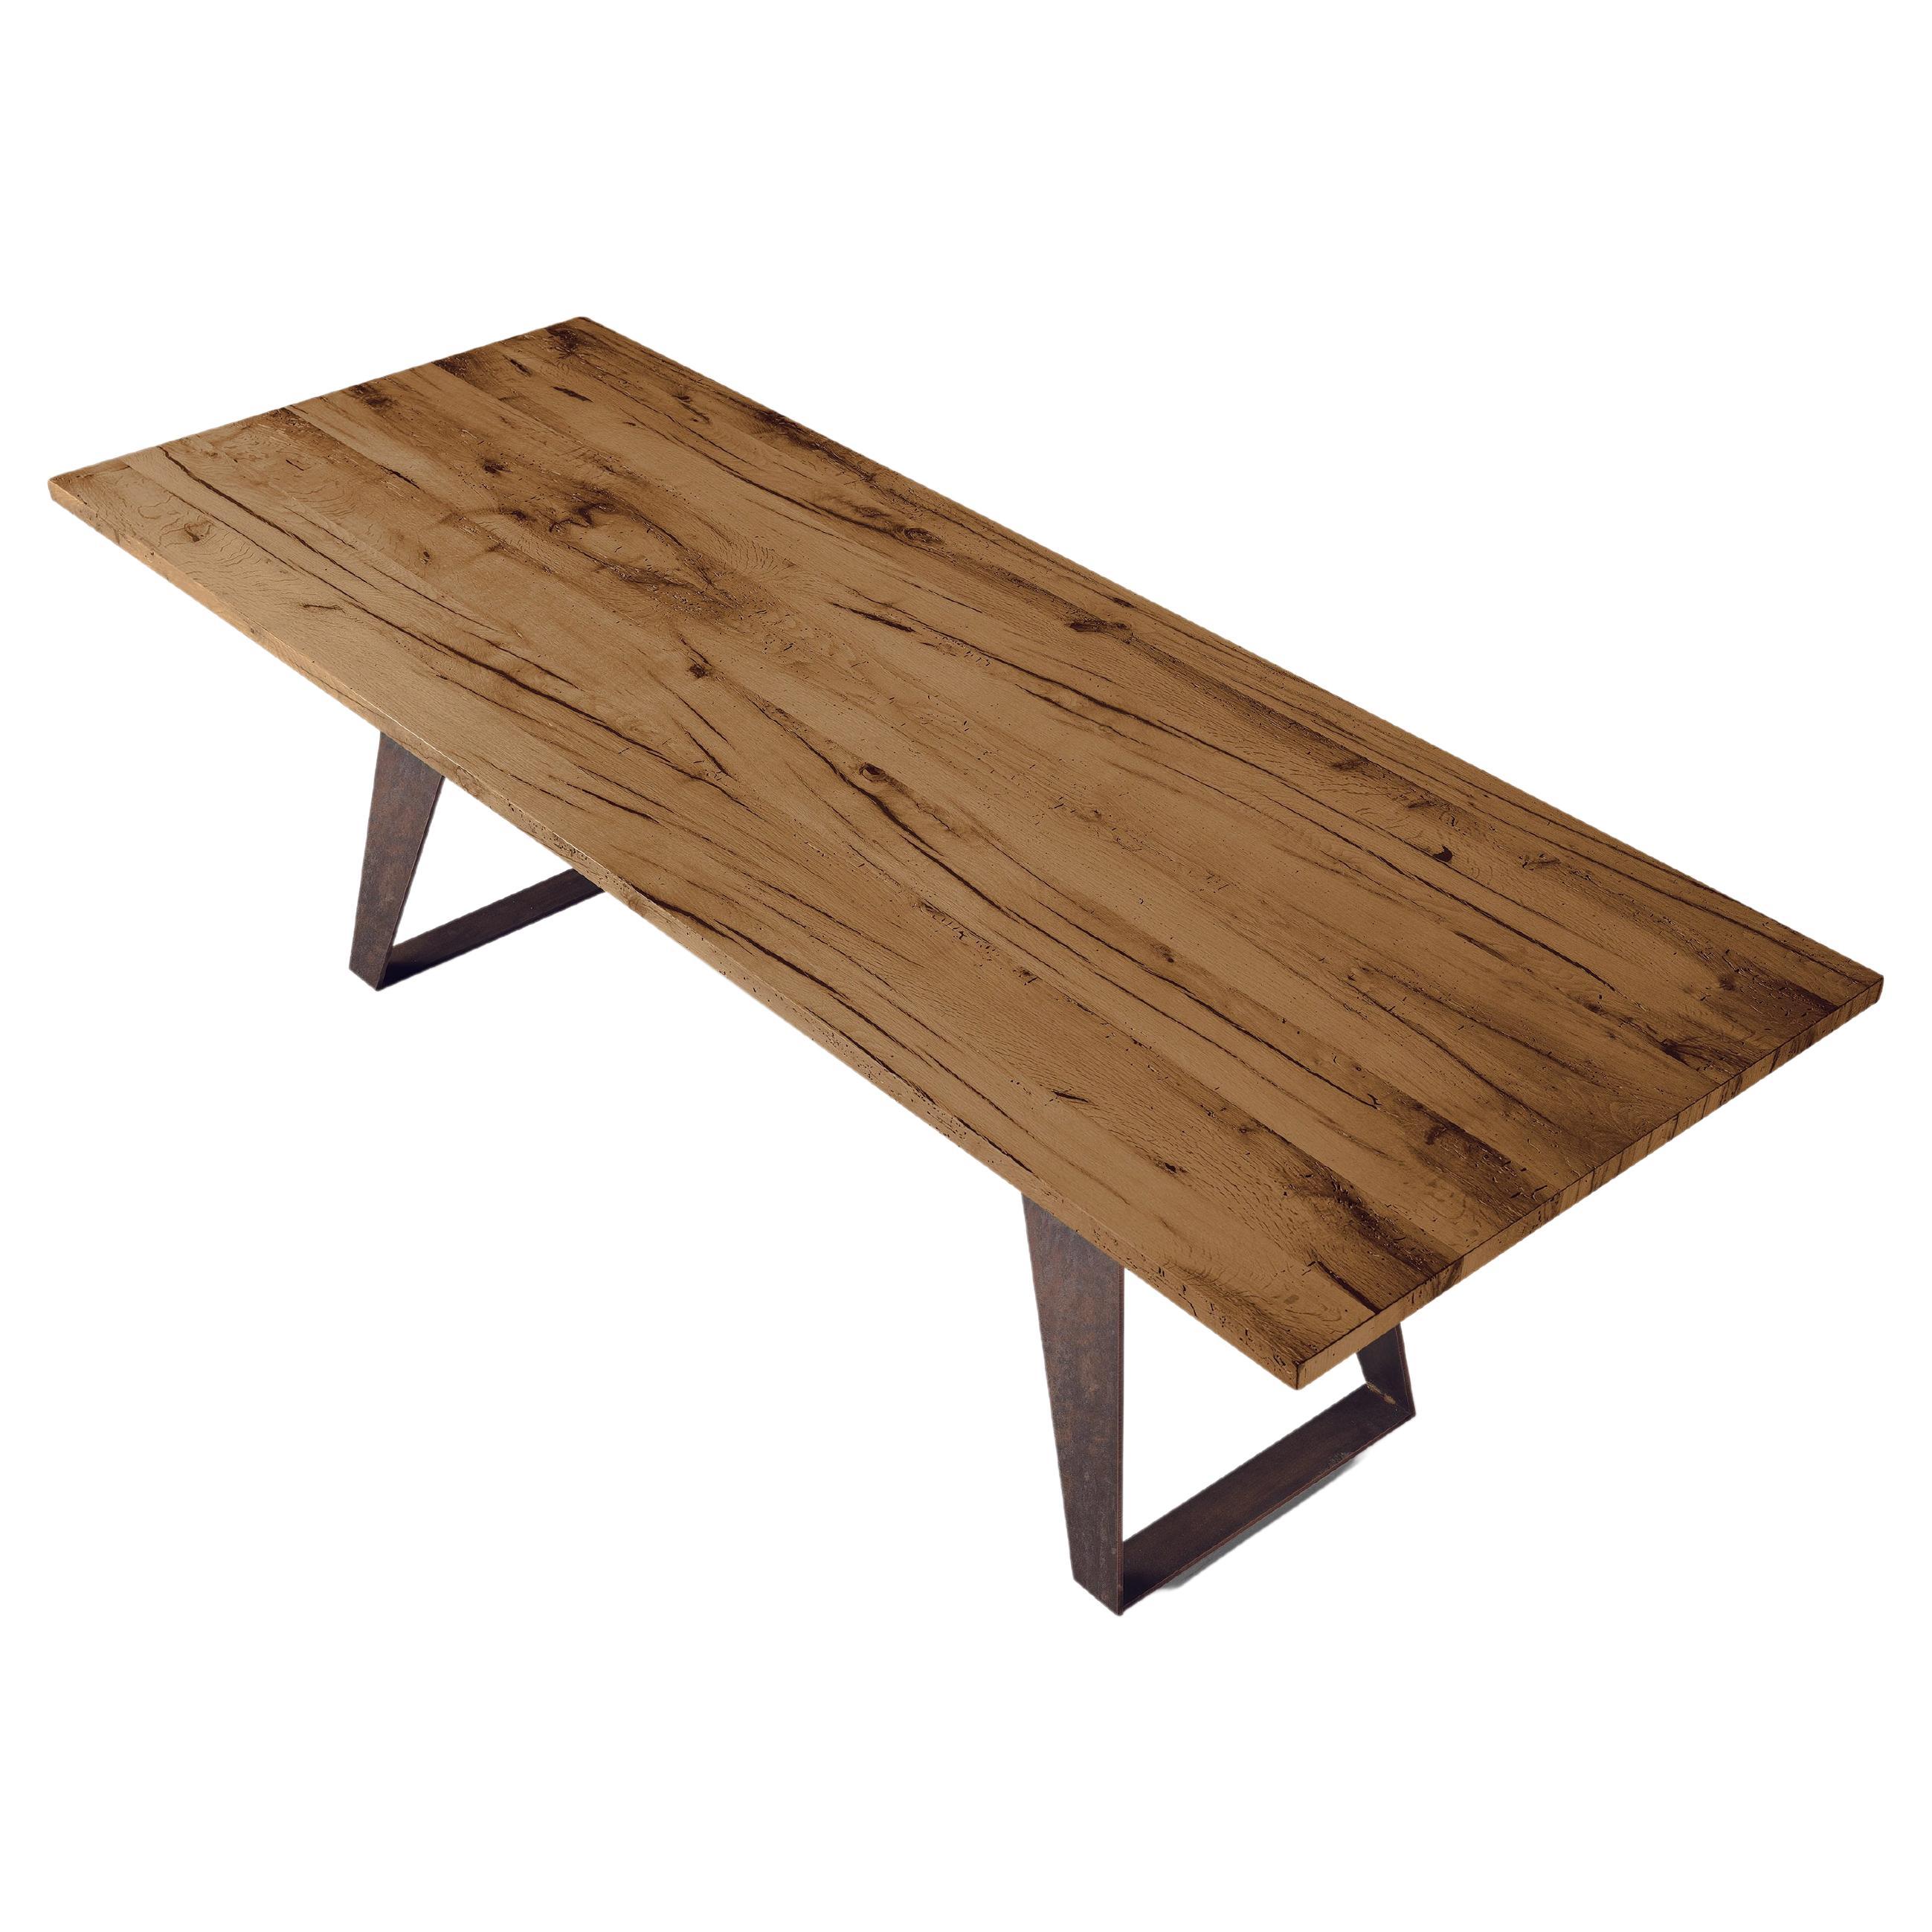 Misura Solid Wood Table, Antique Oak in Hand-Made Natural Finish, Contemporary